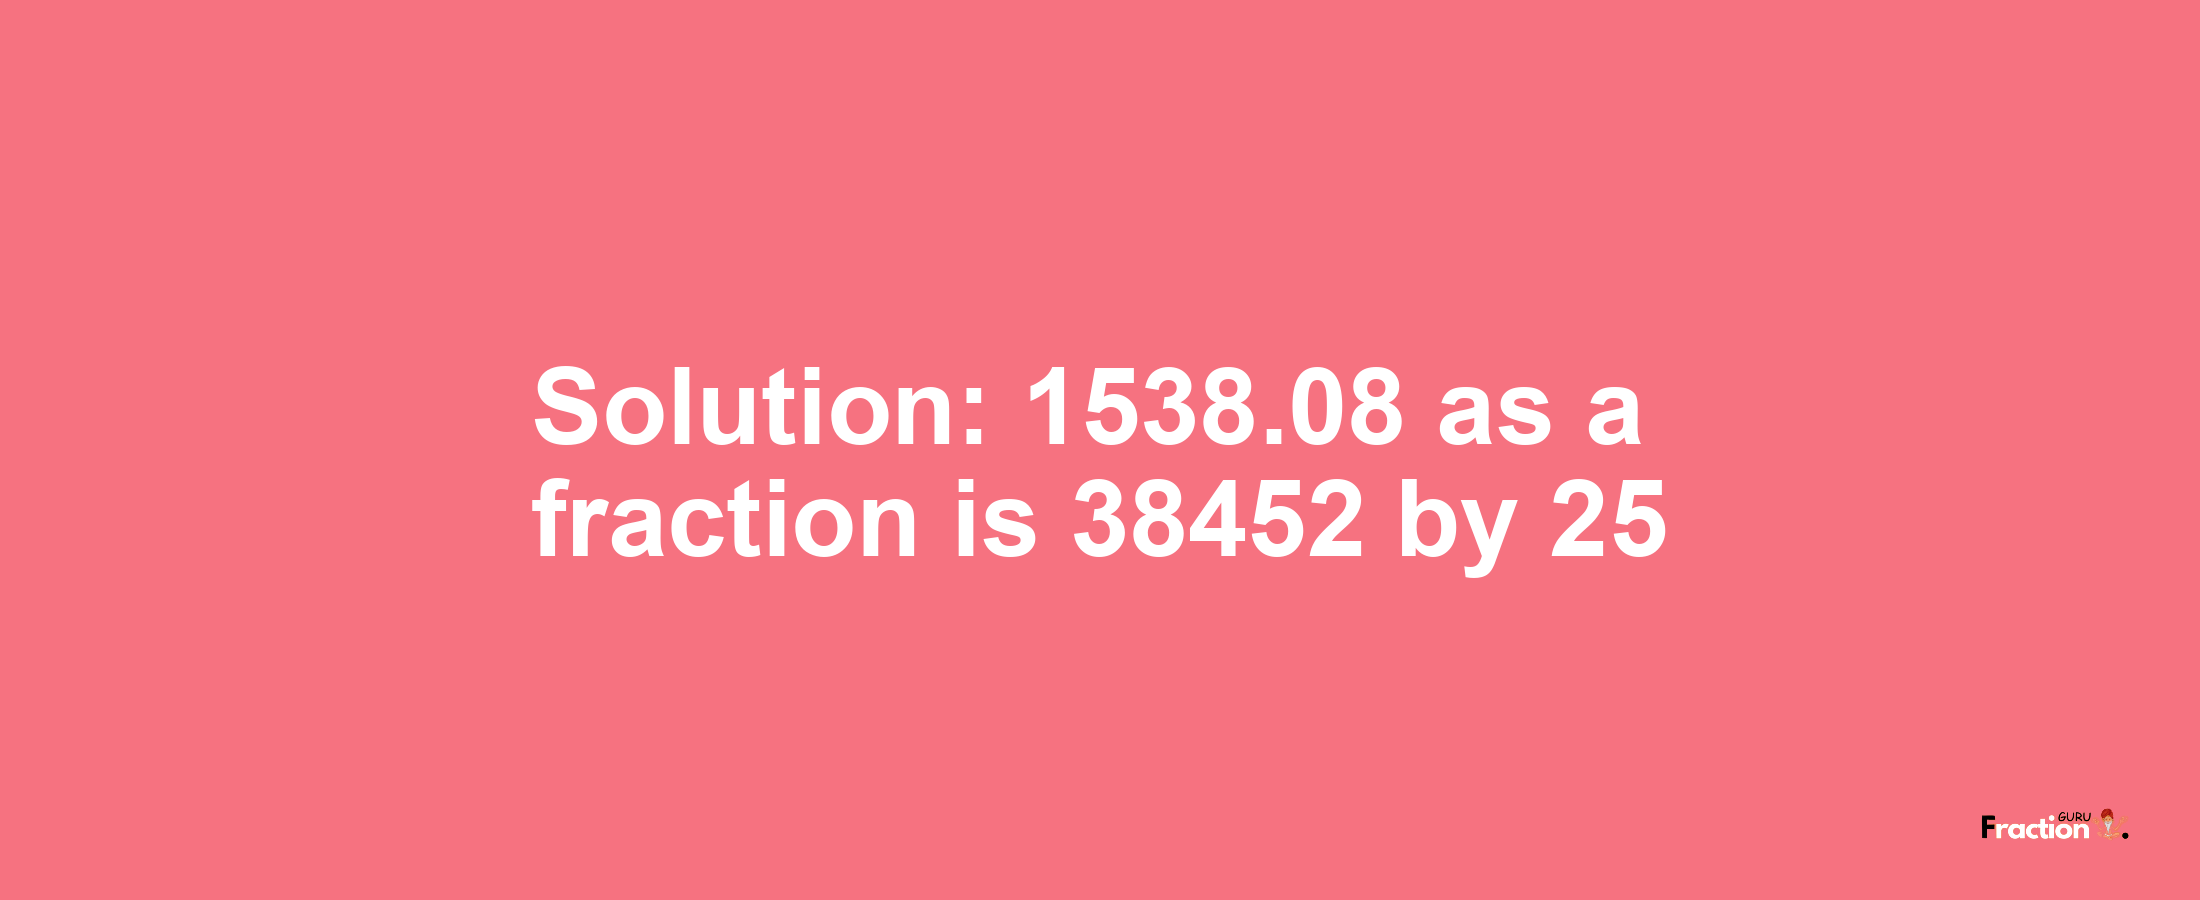 Solution:1538.08 as a fraction is 38452/25